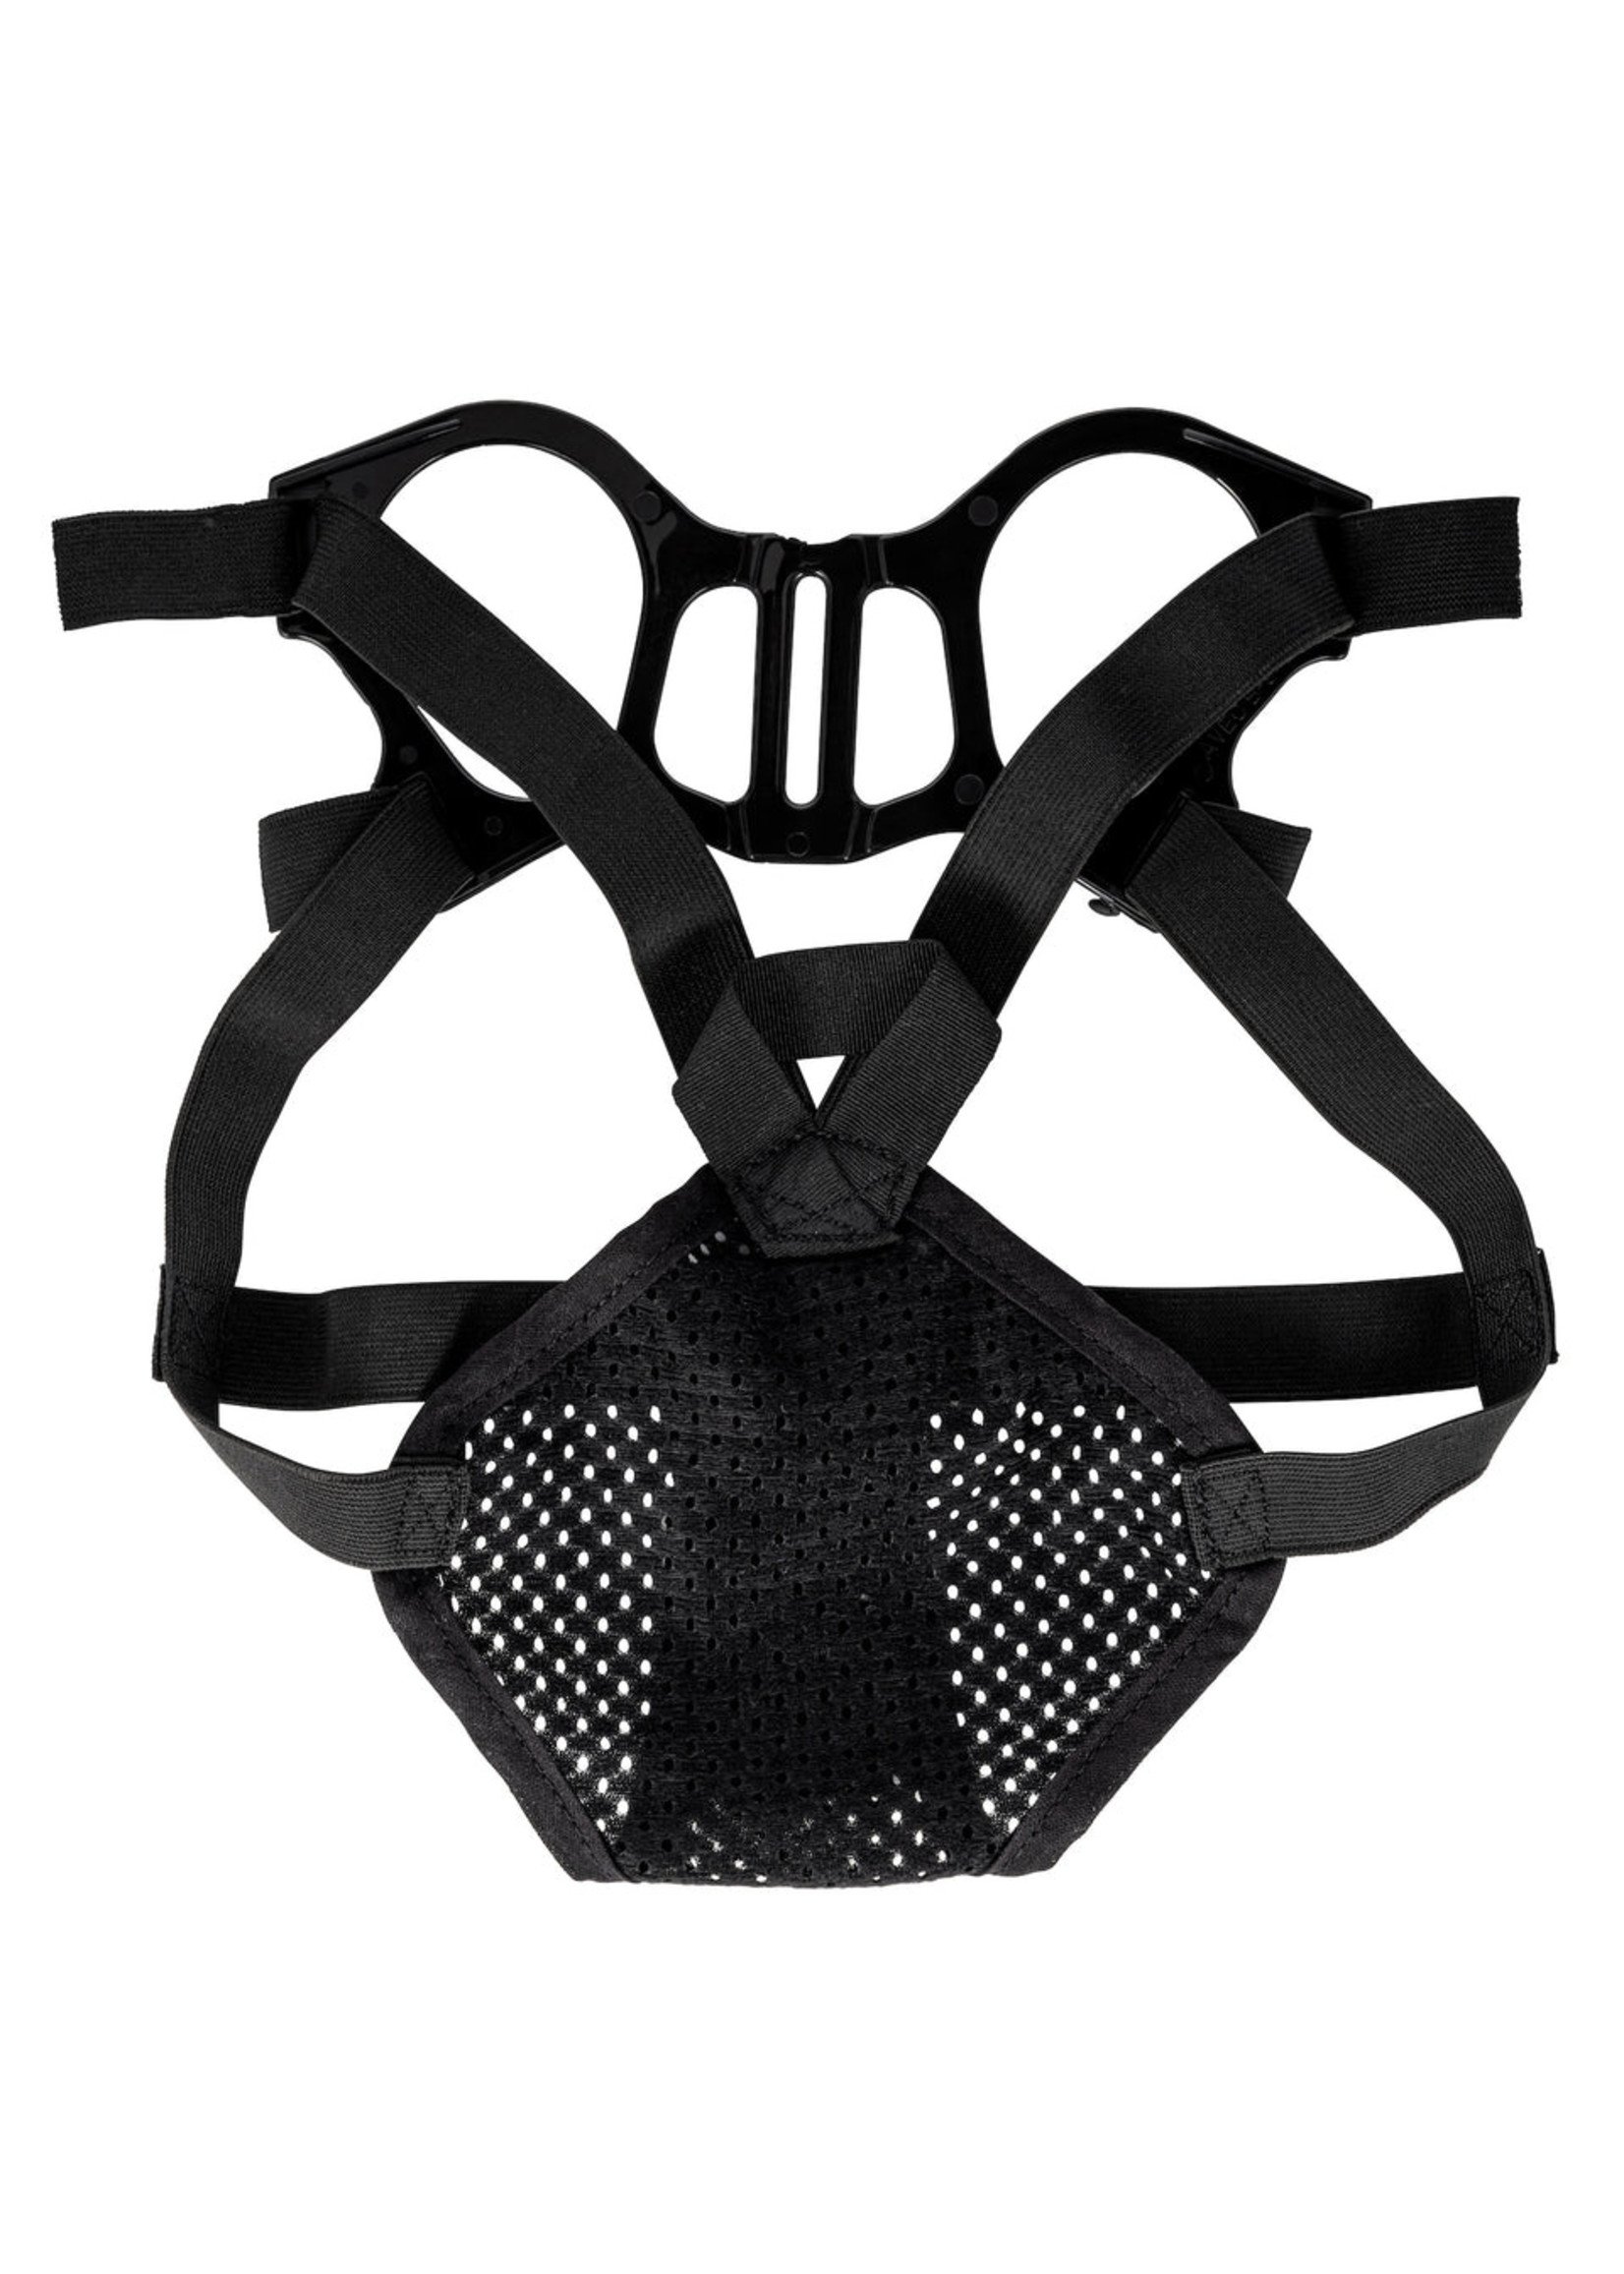 MIRA SAFETY MESH HEAD HARNESS FOR TAPR